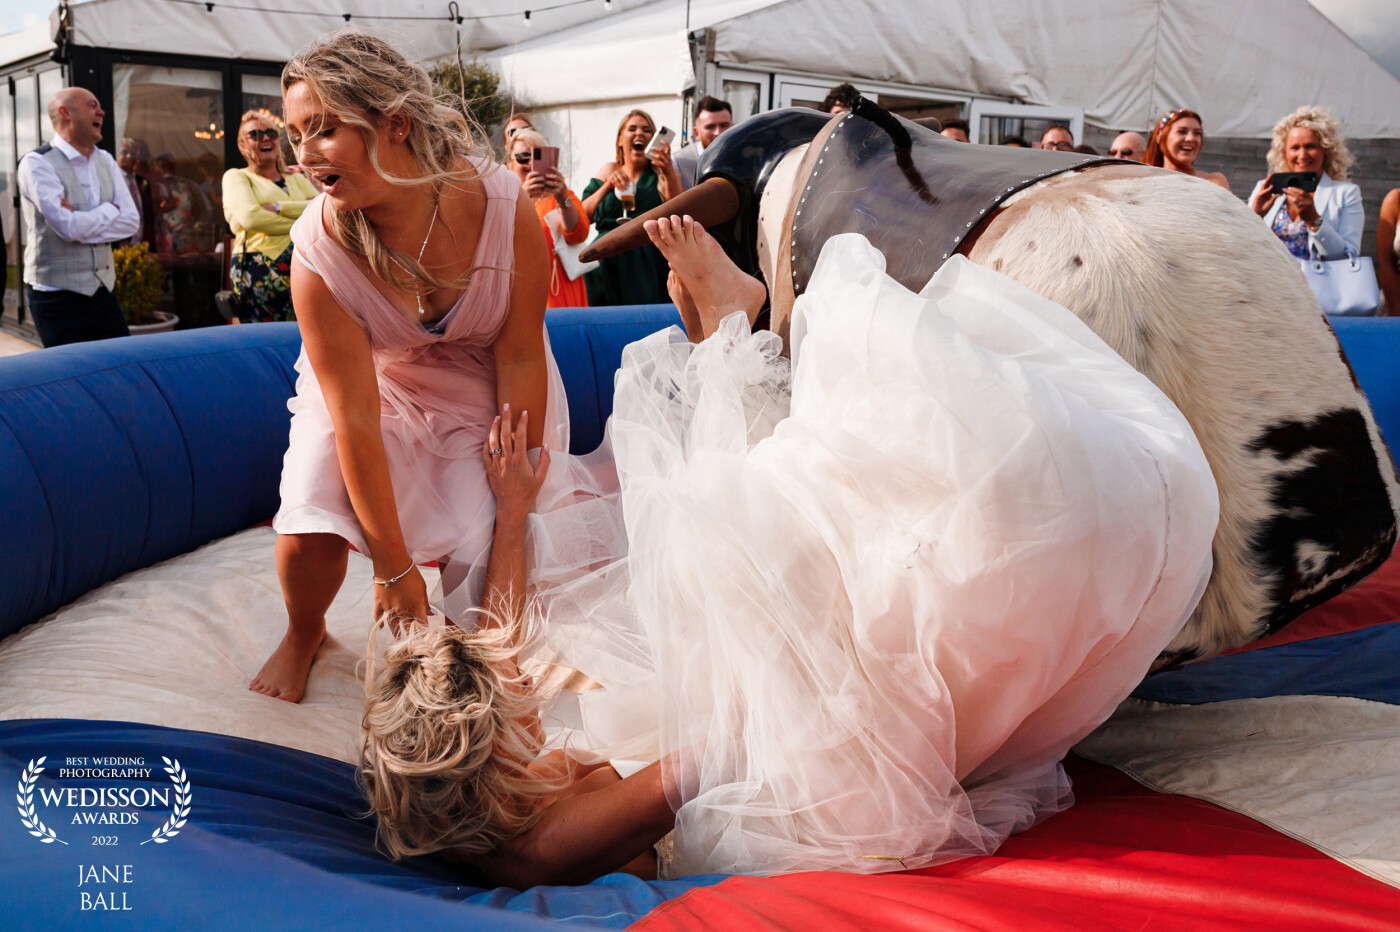 I knew this wedding was going to fun filled when the bride told me they were having a rodeo bull at the reception and it certainly proved to be the case when almost everyone in the wedding party had a go!<br />
I was definitely in the right place at the right time to get this shot as the bride came flying off it almost knocking one of her bridesmaids over in the process.